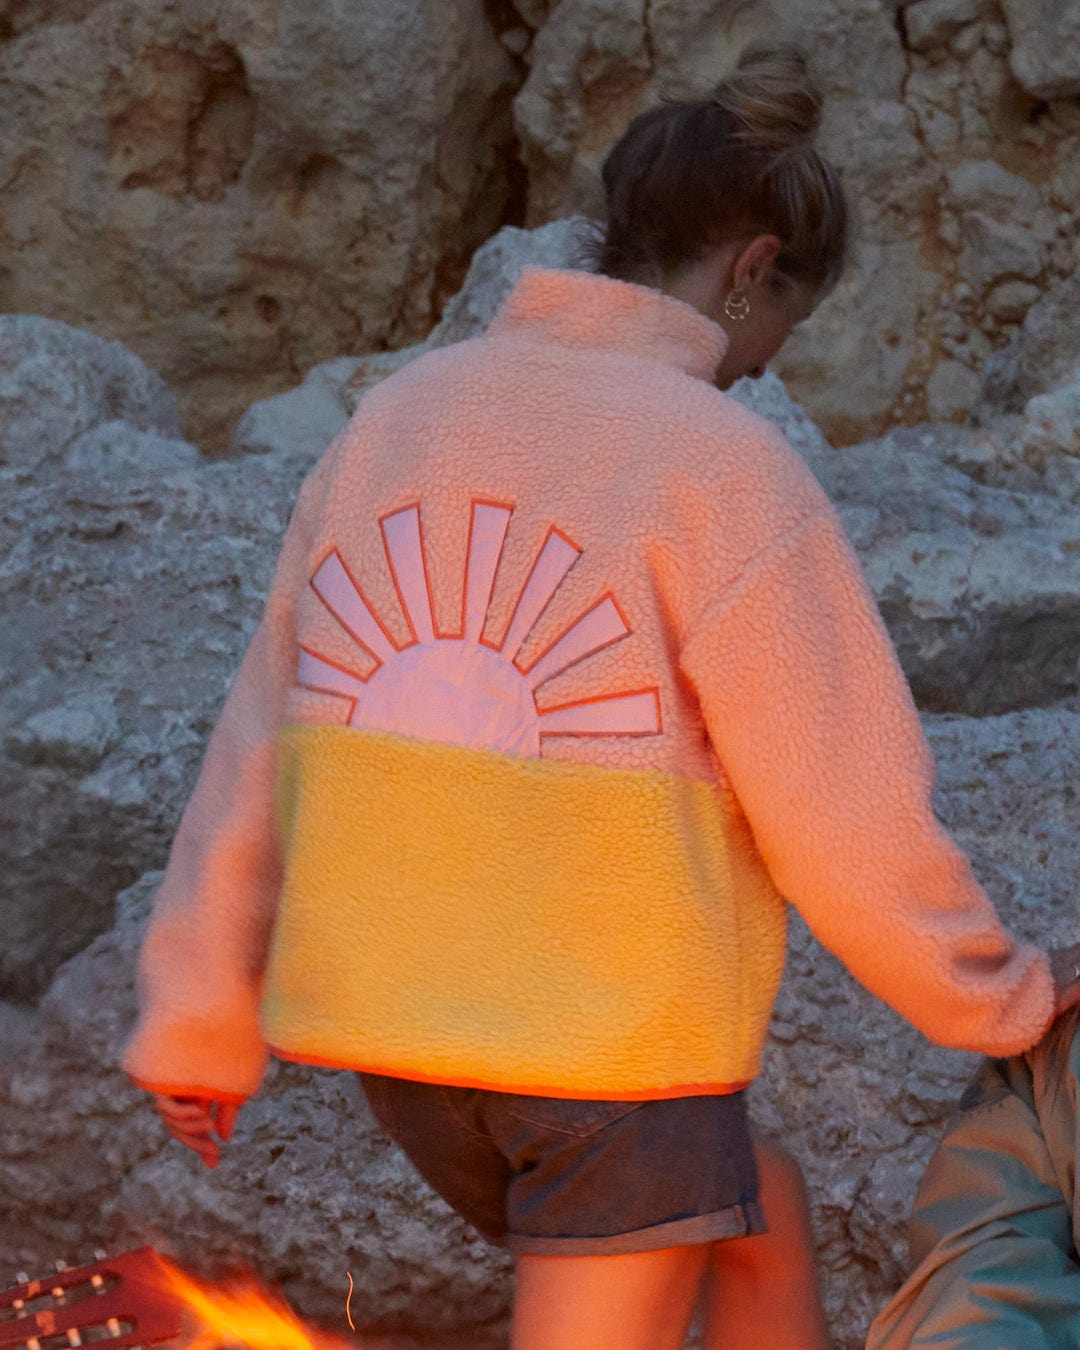 A woman is standing next to a campfire wearing an Emery Sunshine - Womens Sherpa Fleece - Coral jacket by Saltrock with a sun graphic on it.